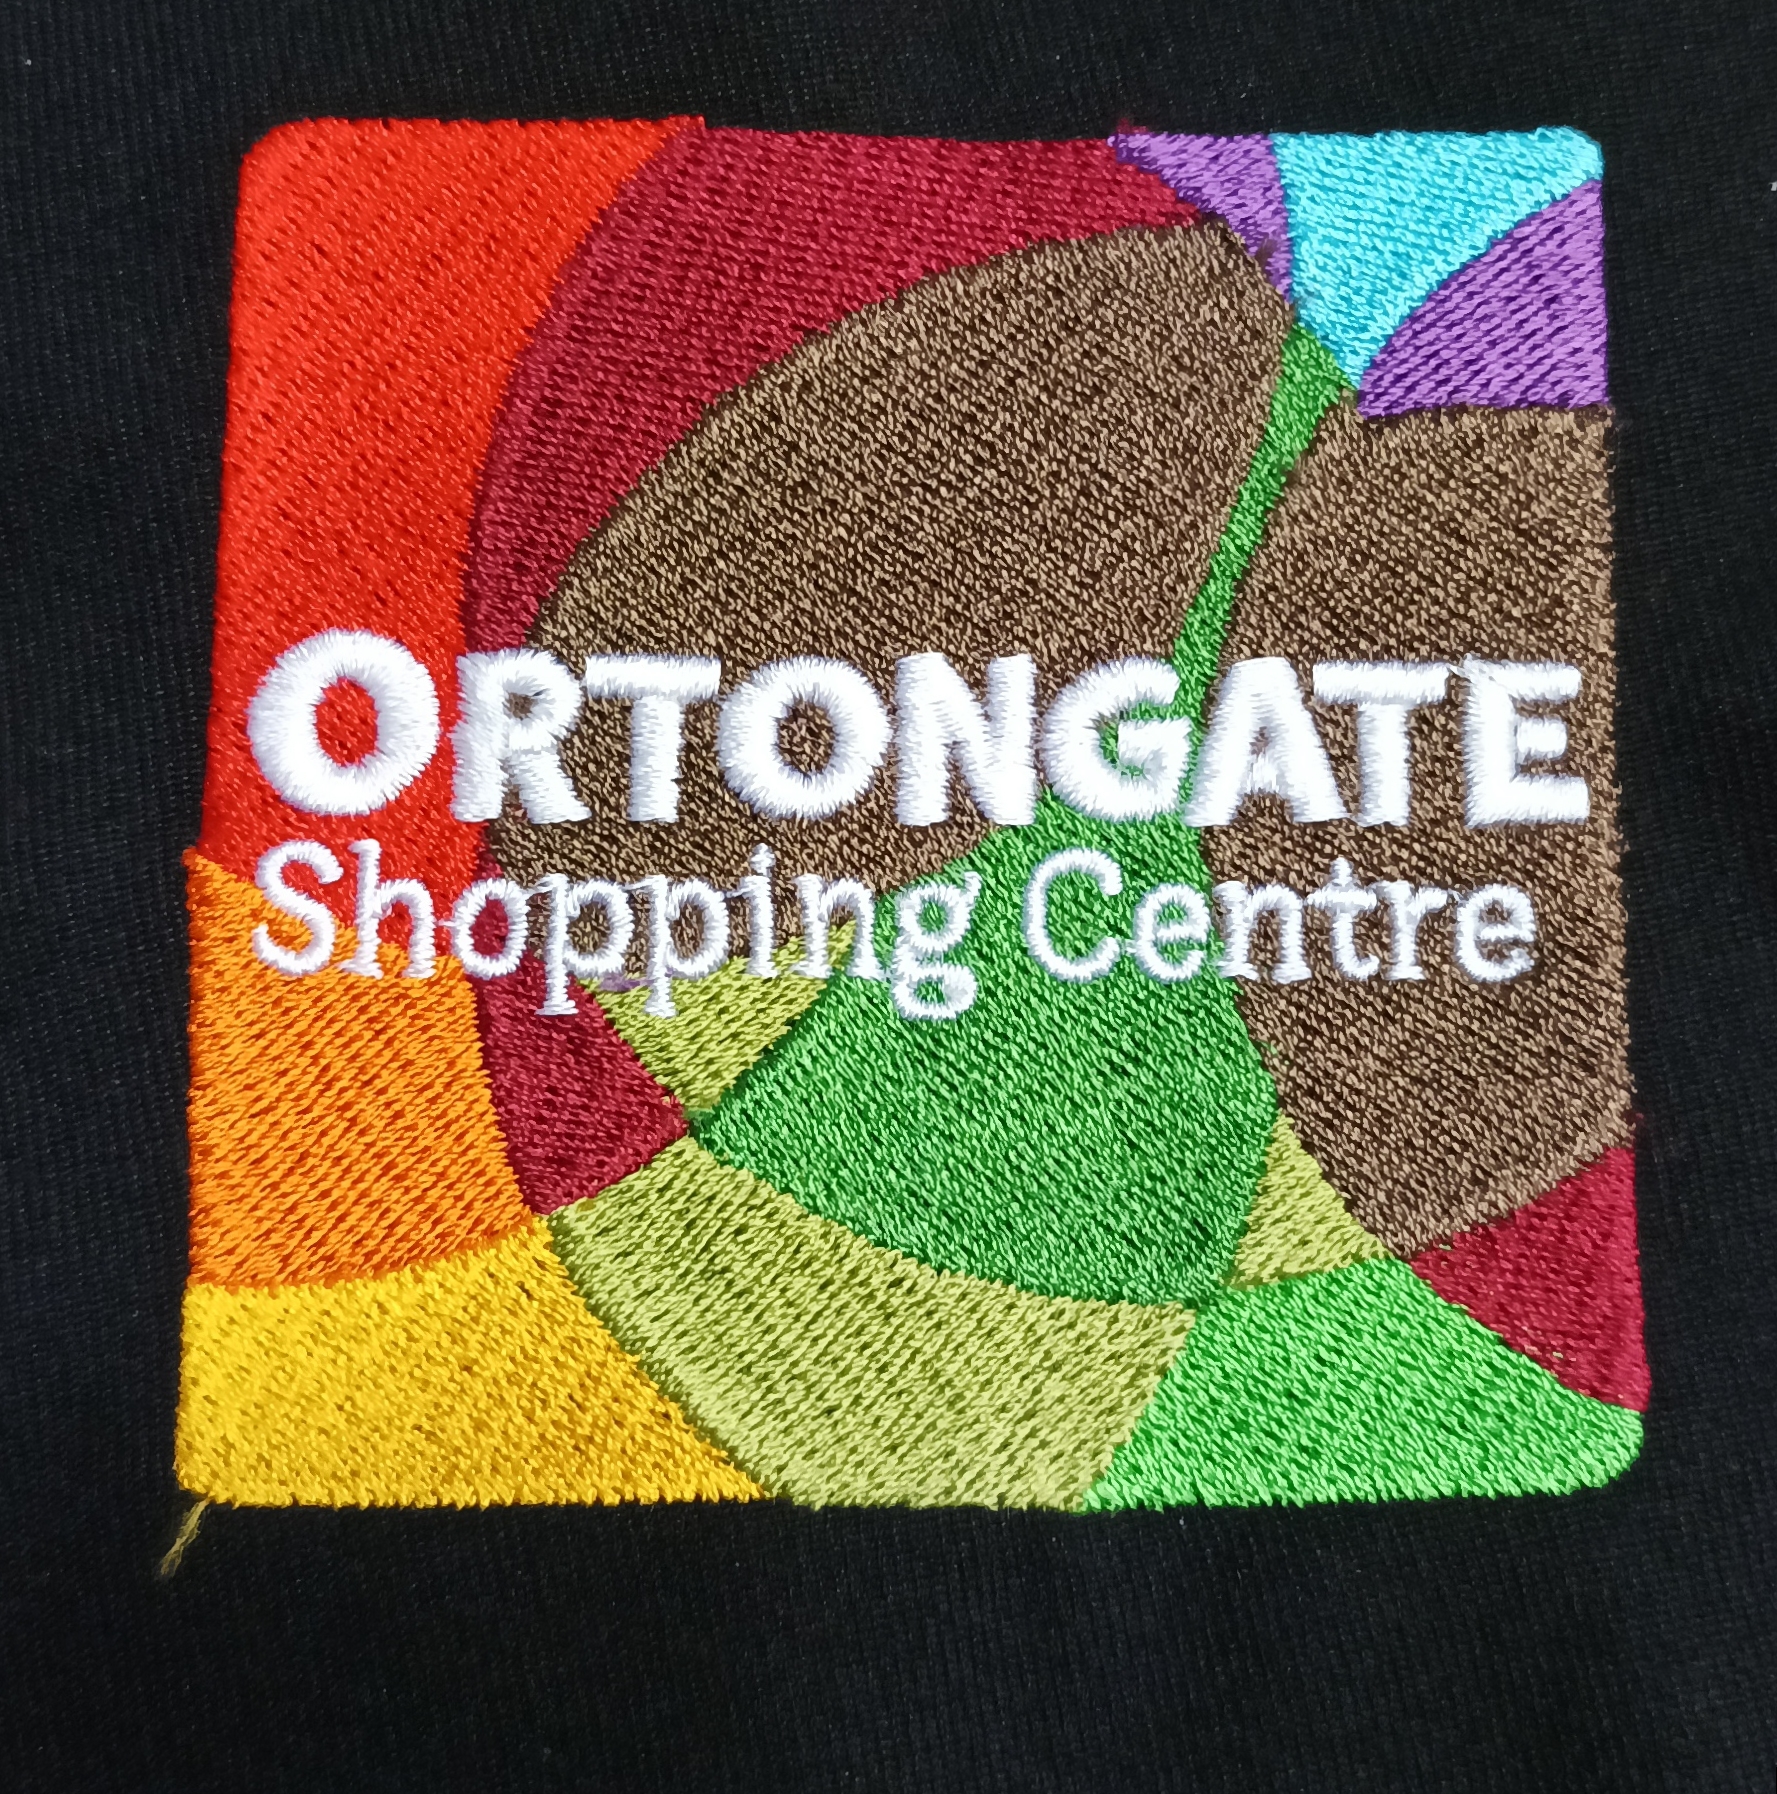 Embroidered logo for the Ortongate Shopping Centre